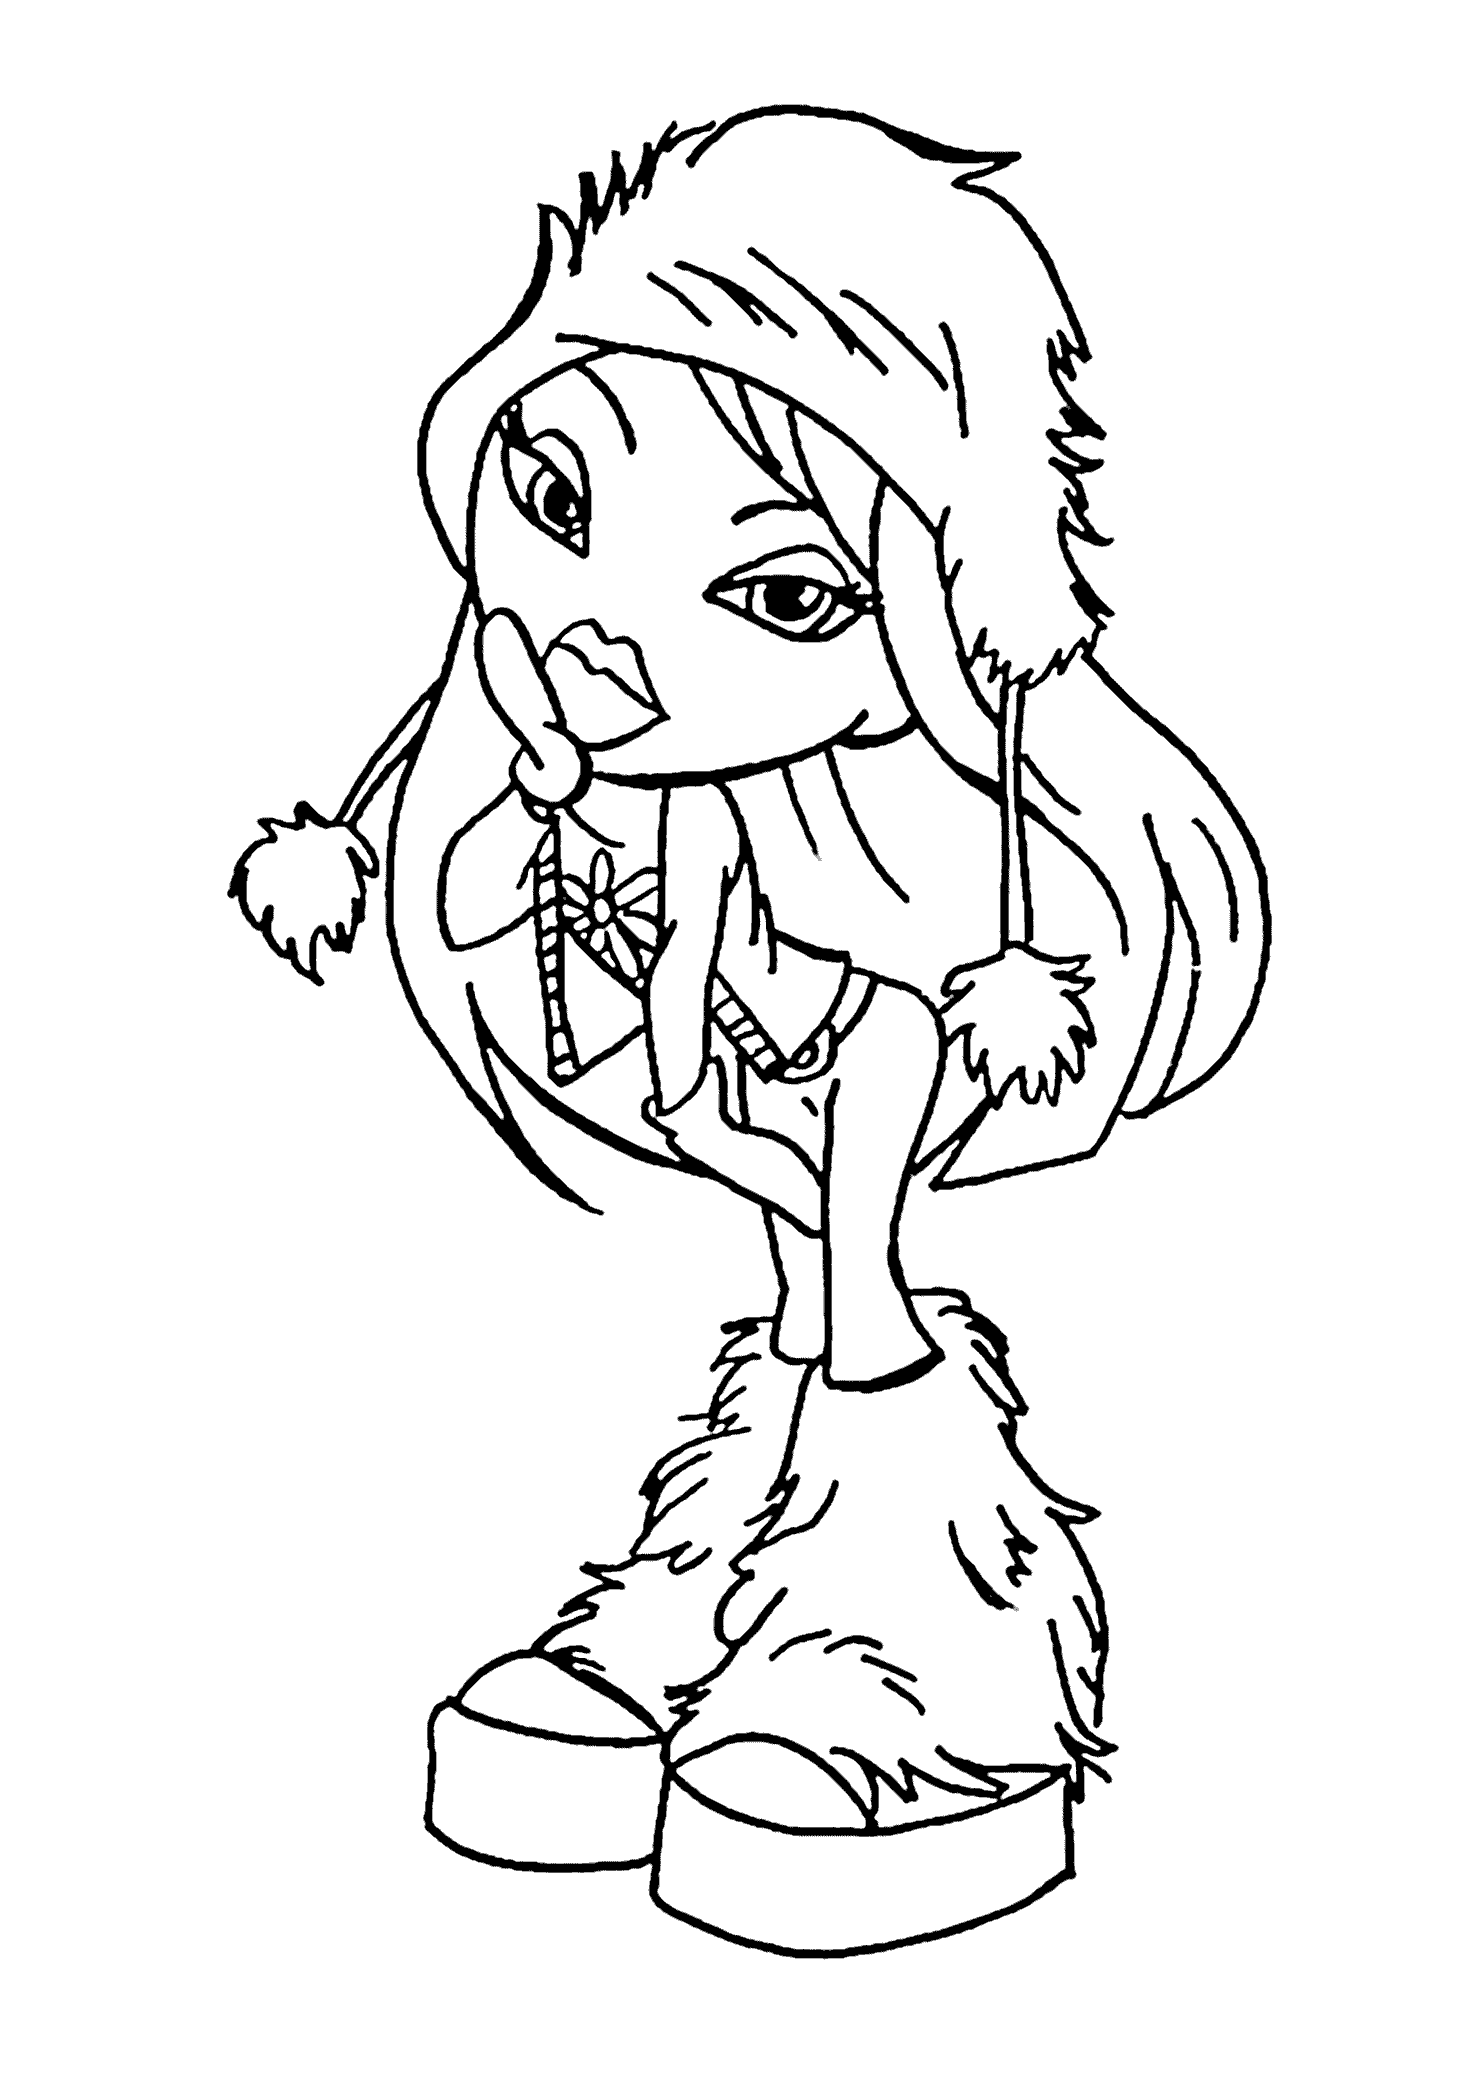 Bratz Winter Style Coloring Pages For Kids Printable Free Disney Princess Coloring Pa